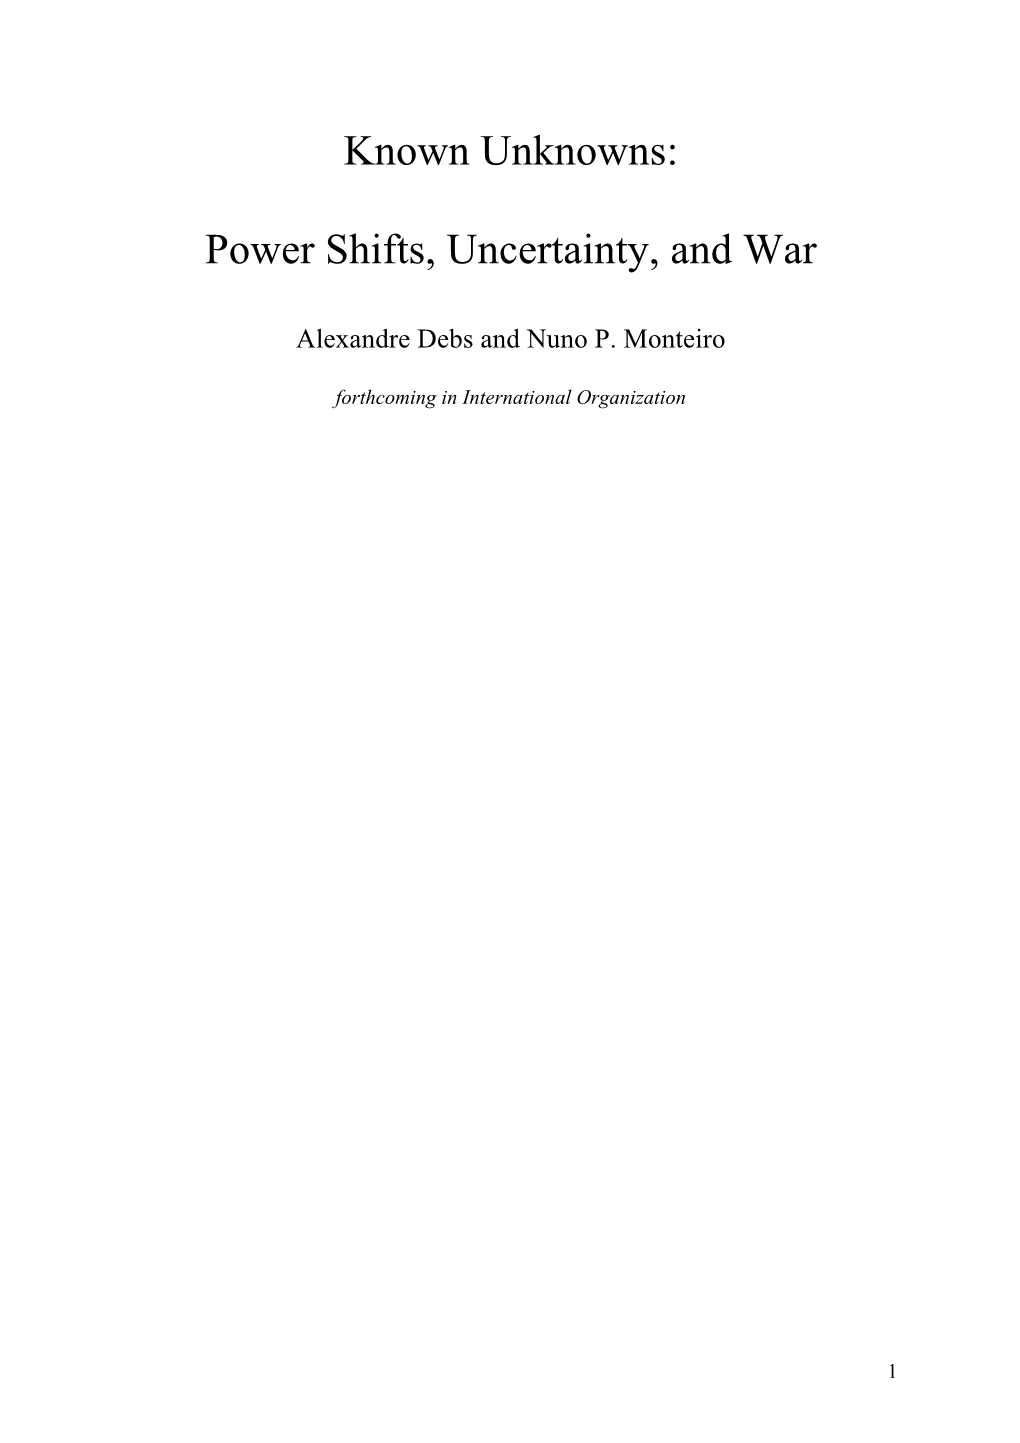 Known Unknowns: Power Shifts, Uncertainty, and War